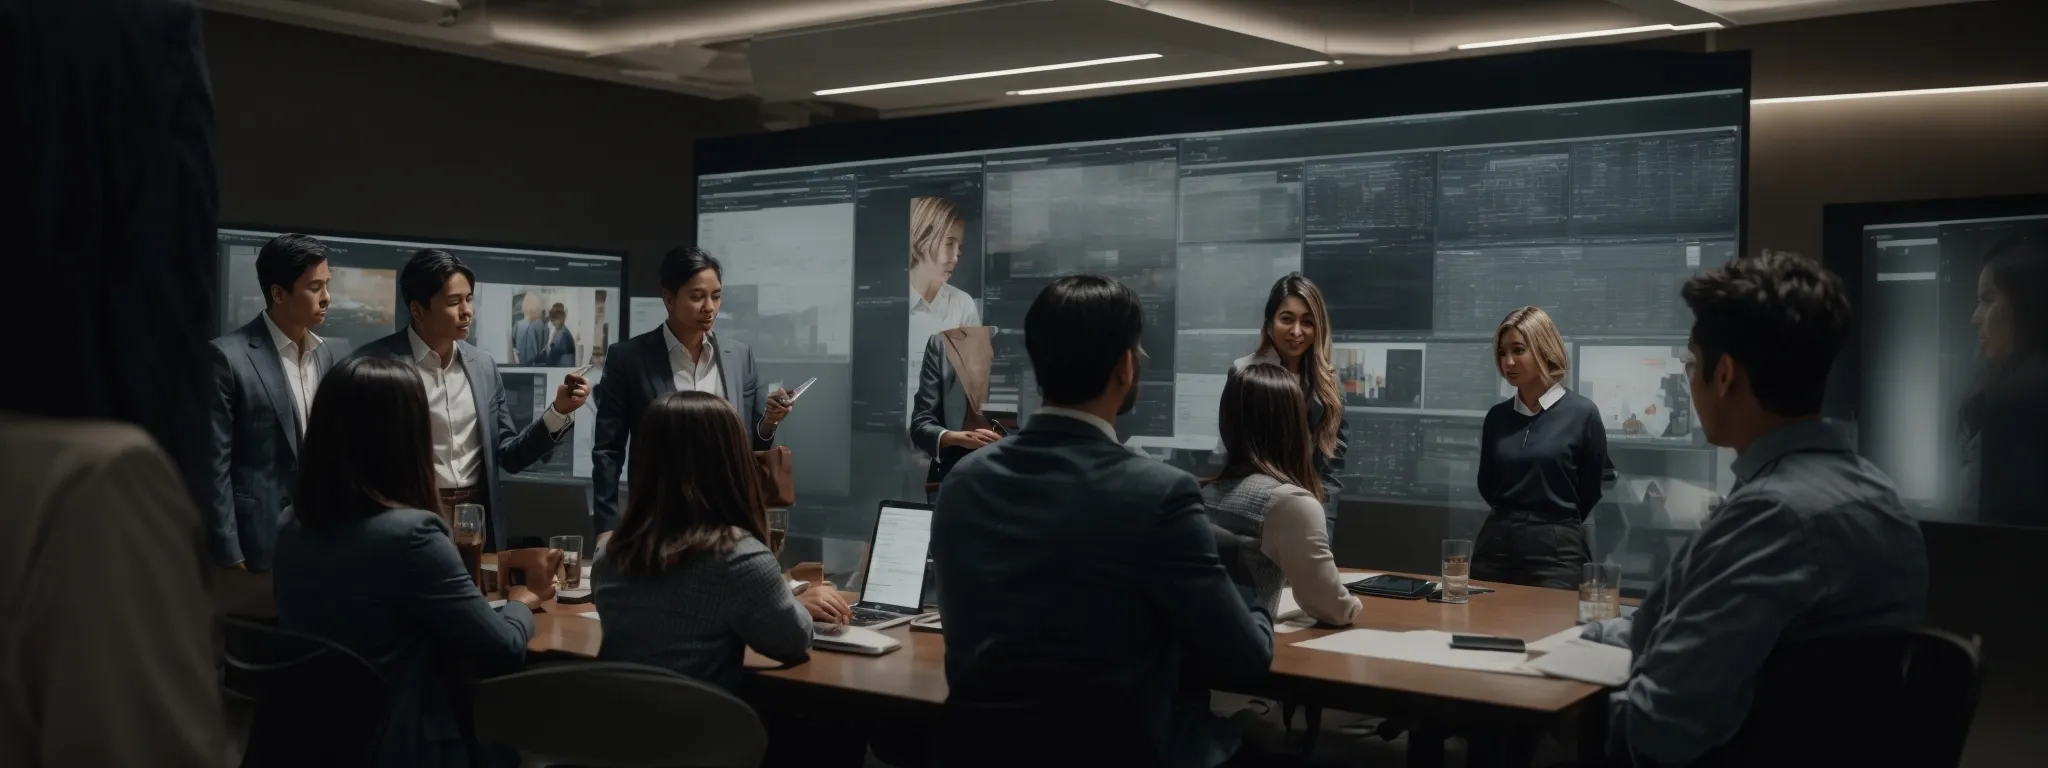 a dynamic group of professionals collaboratively brainstorming over a digital marketing strategy on a large interactive screen with a web search display.